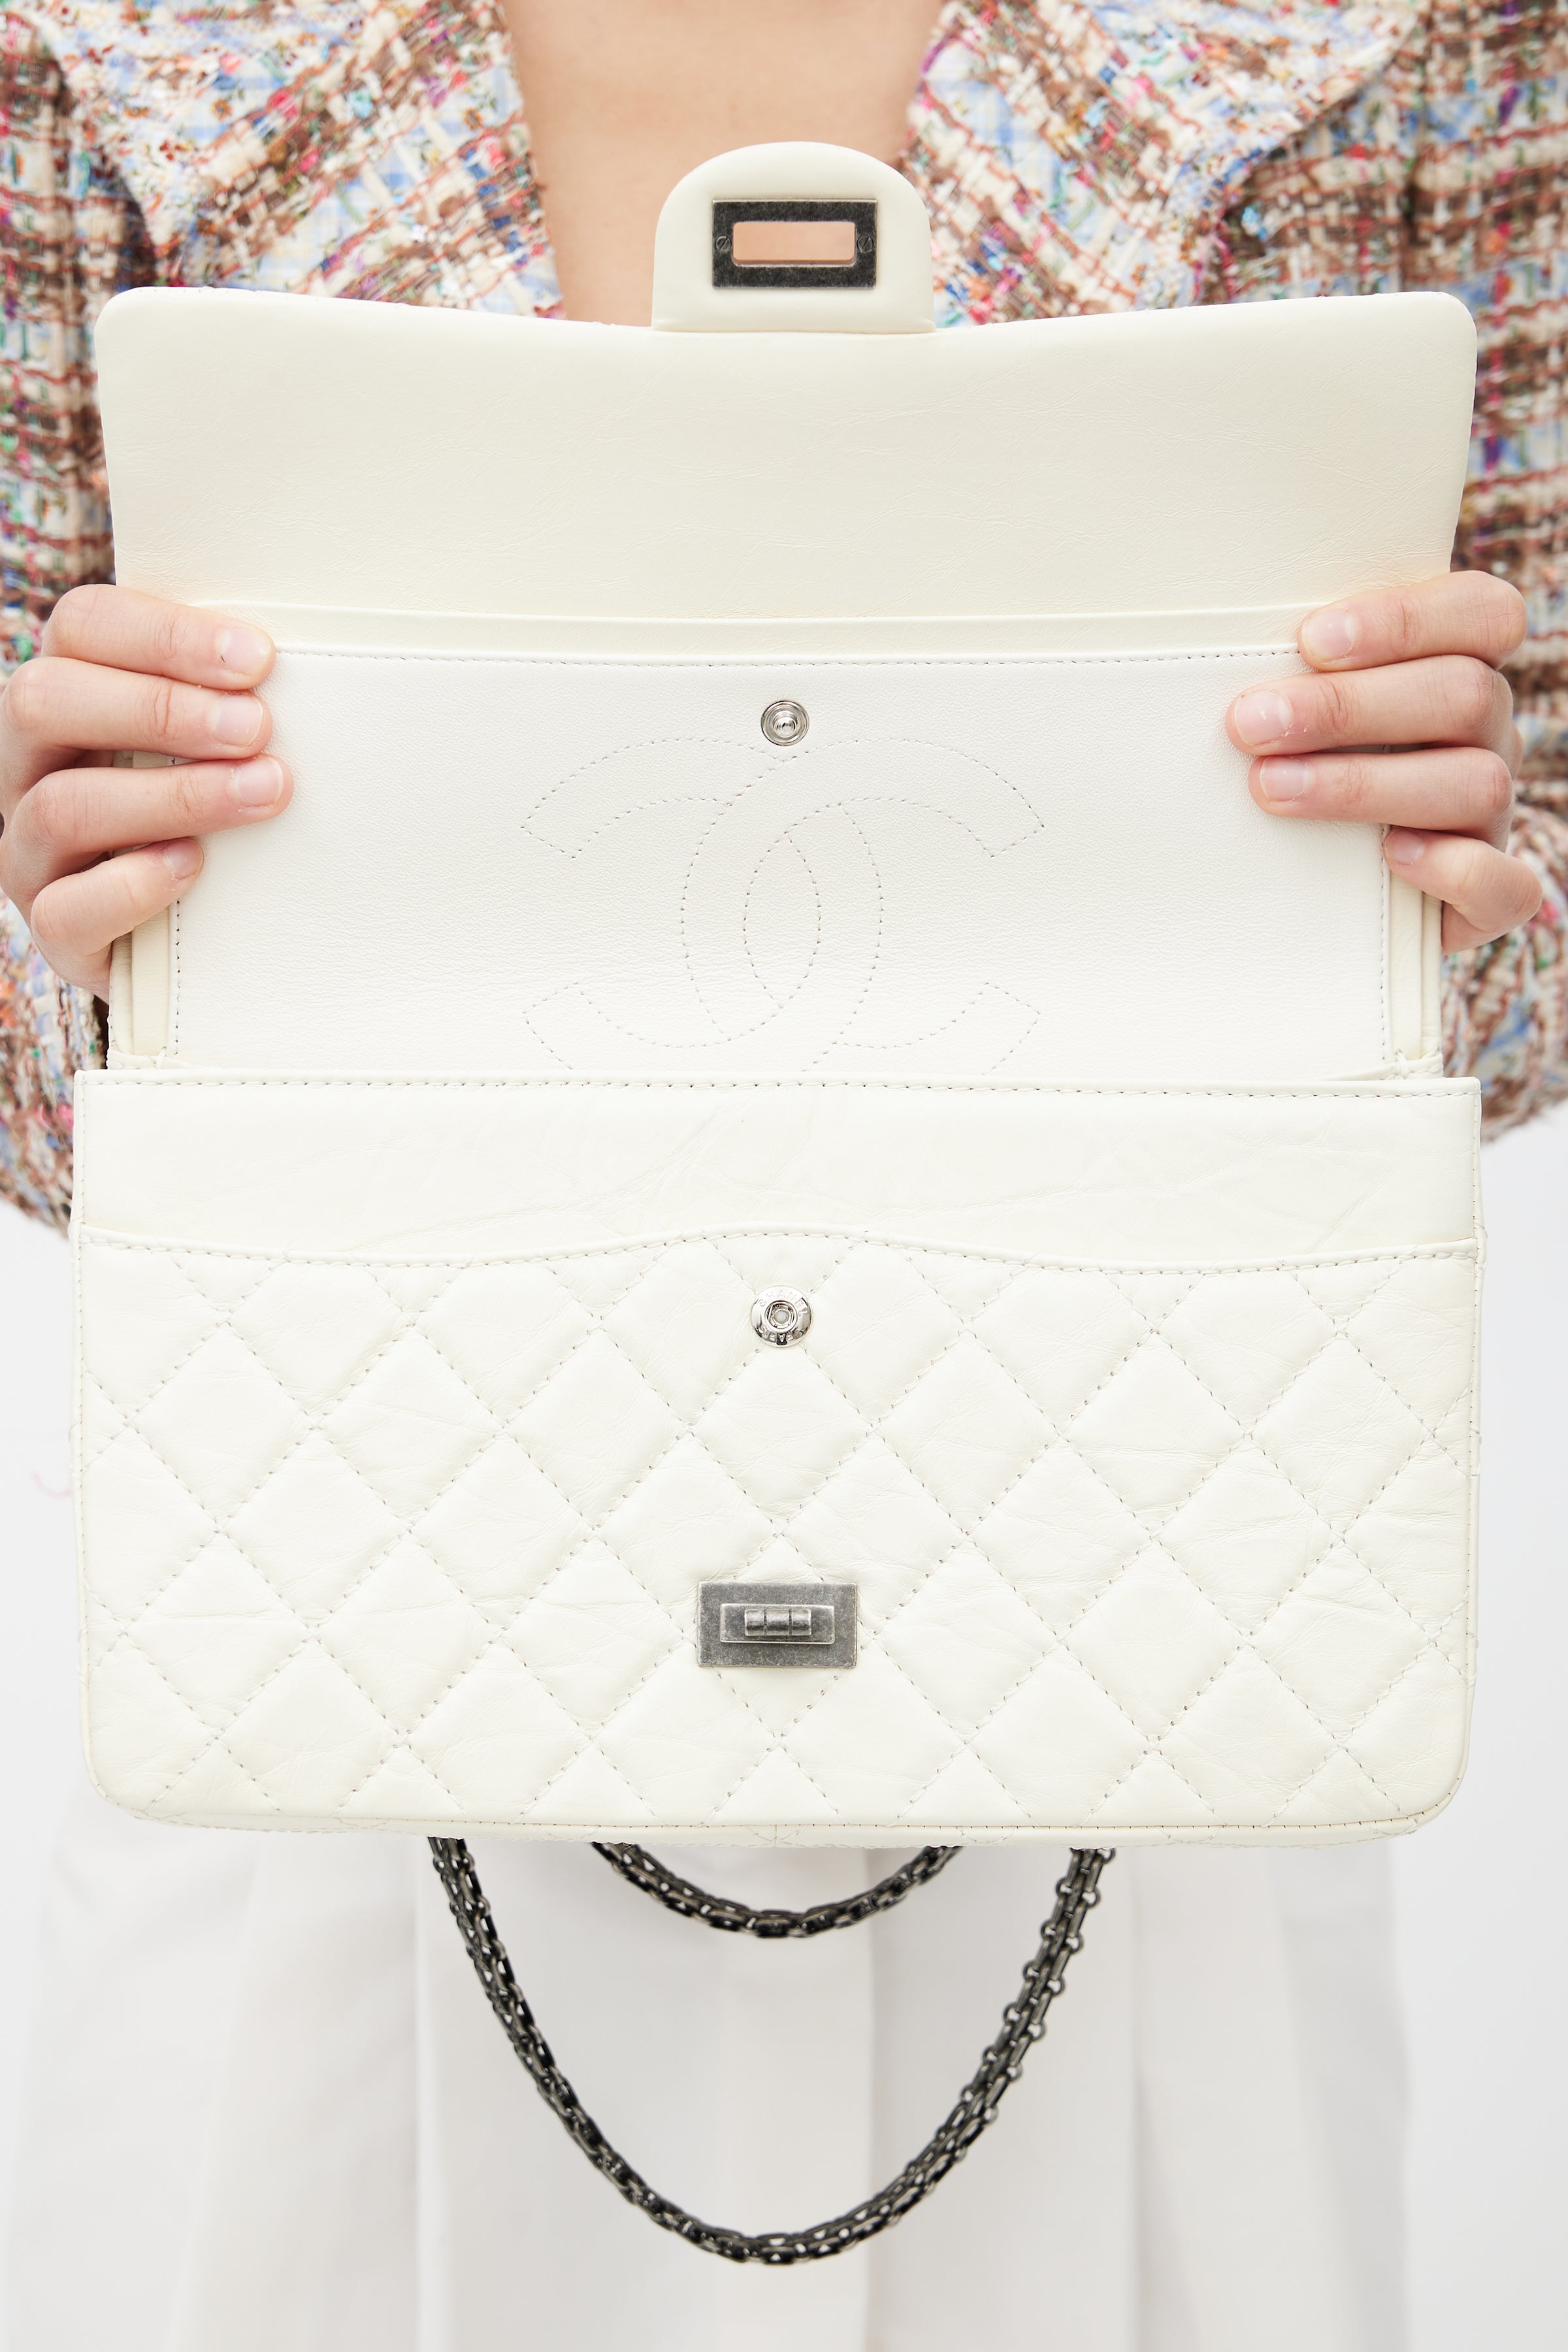 Chanel // 2012 Cream Quilted Leather 2.55 Reissue 226 Shoulder Bag